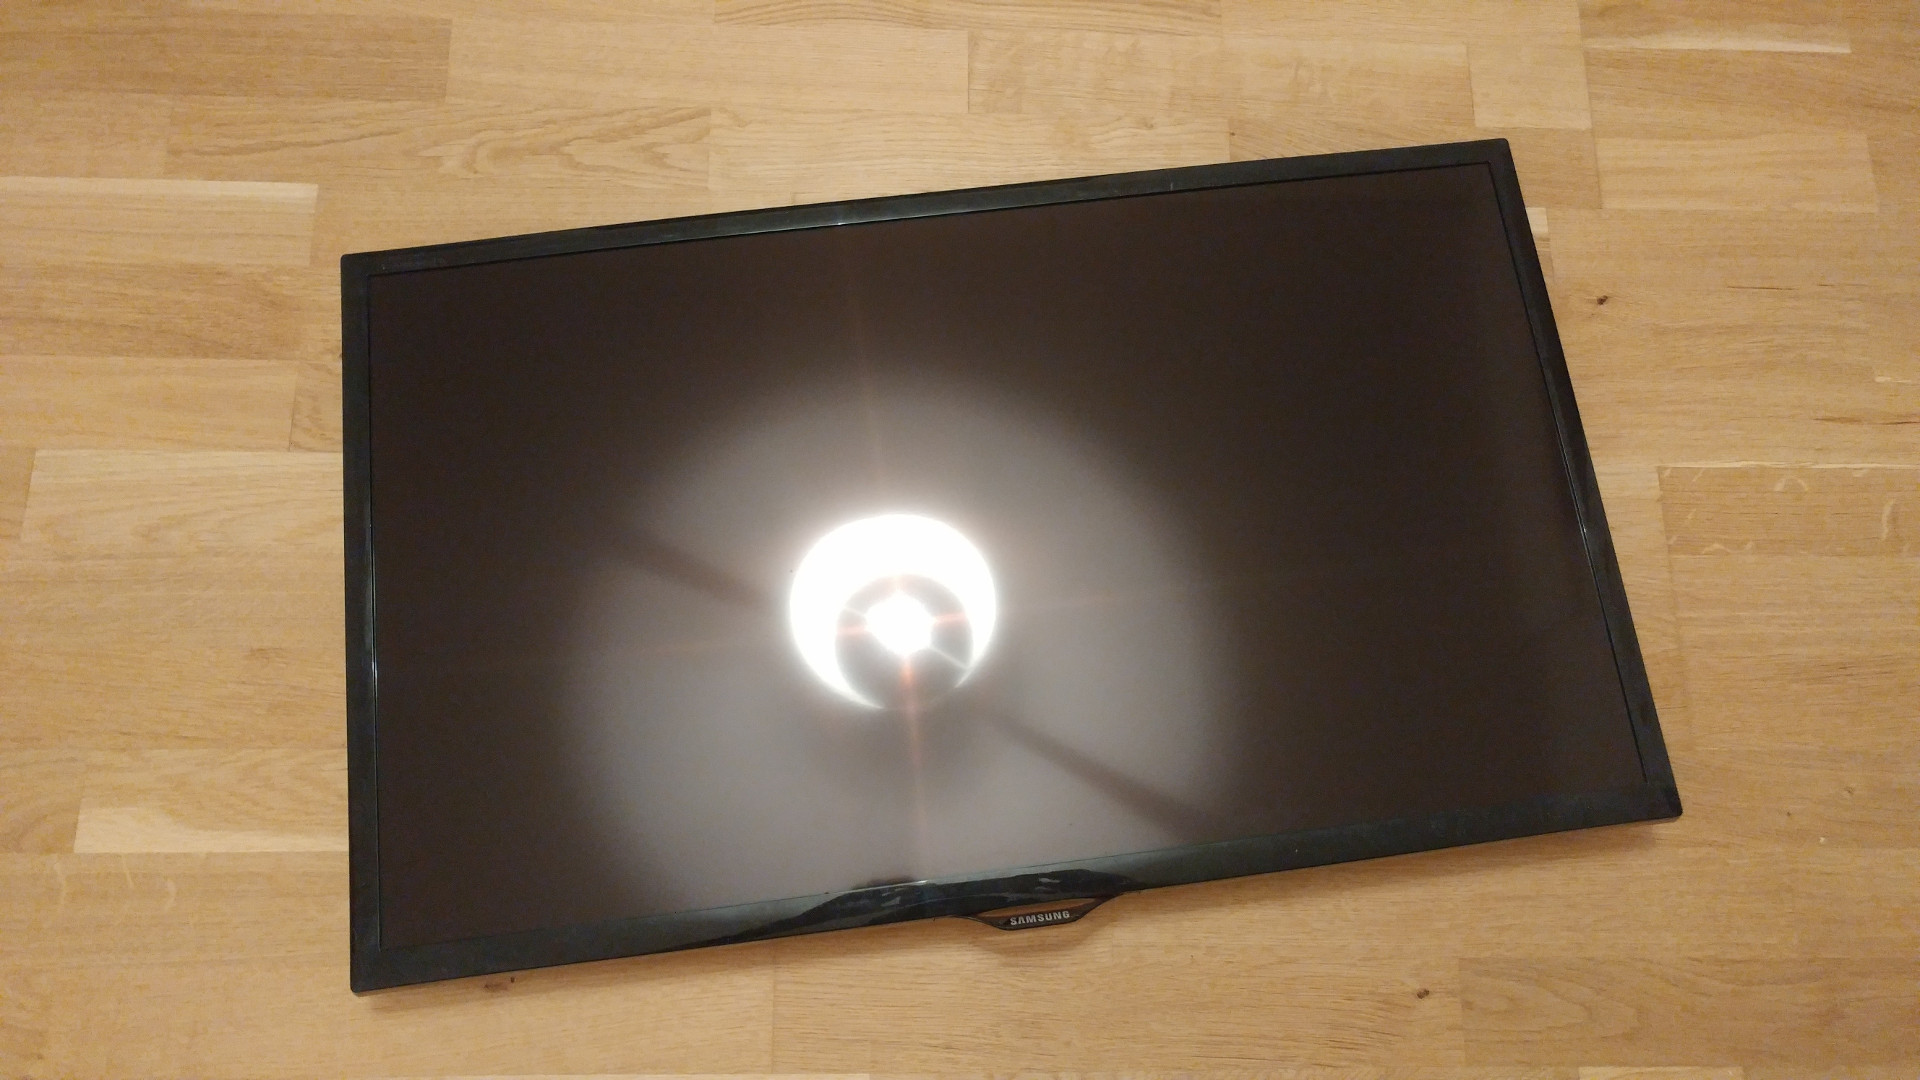 What is the reason why the LED display screen appears black